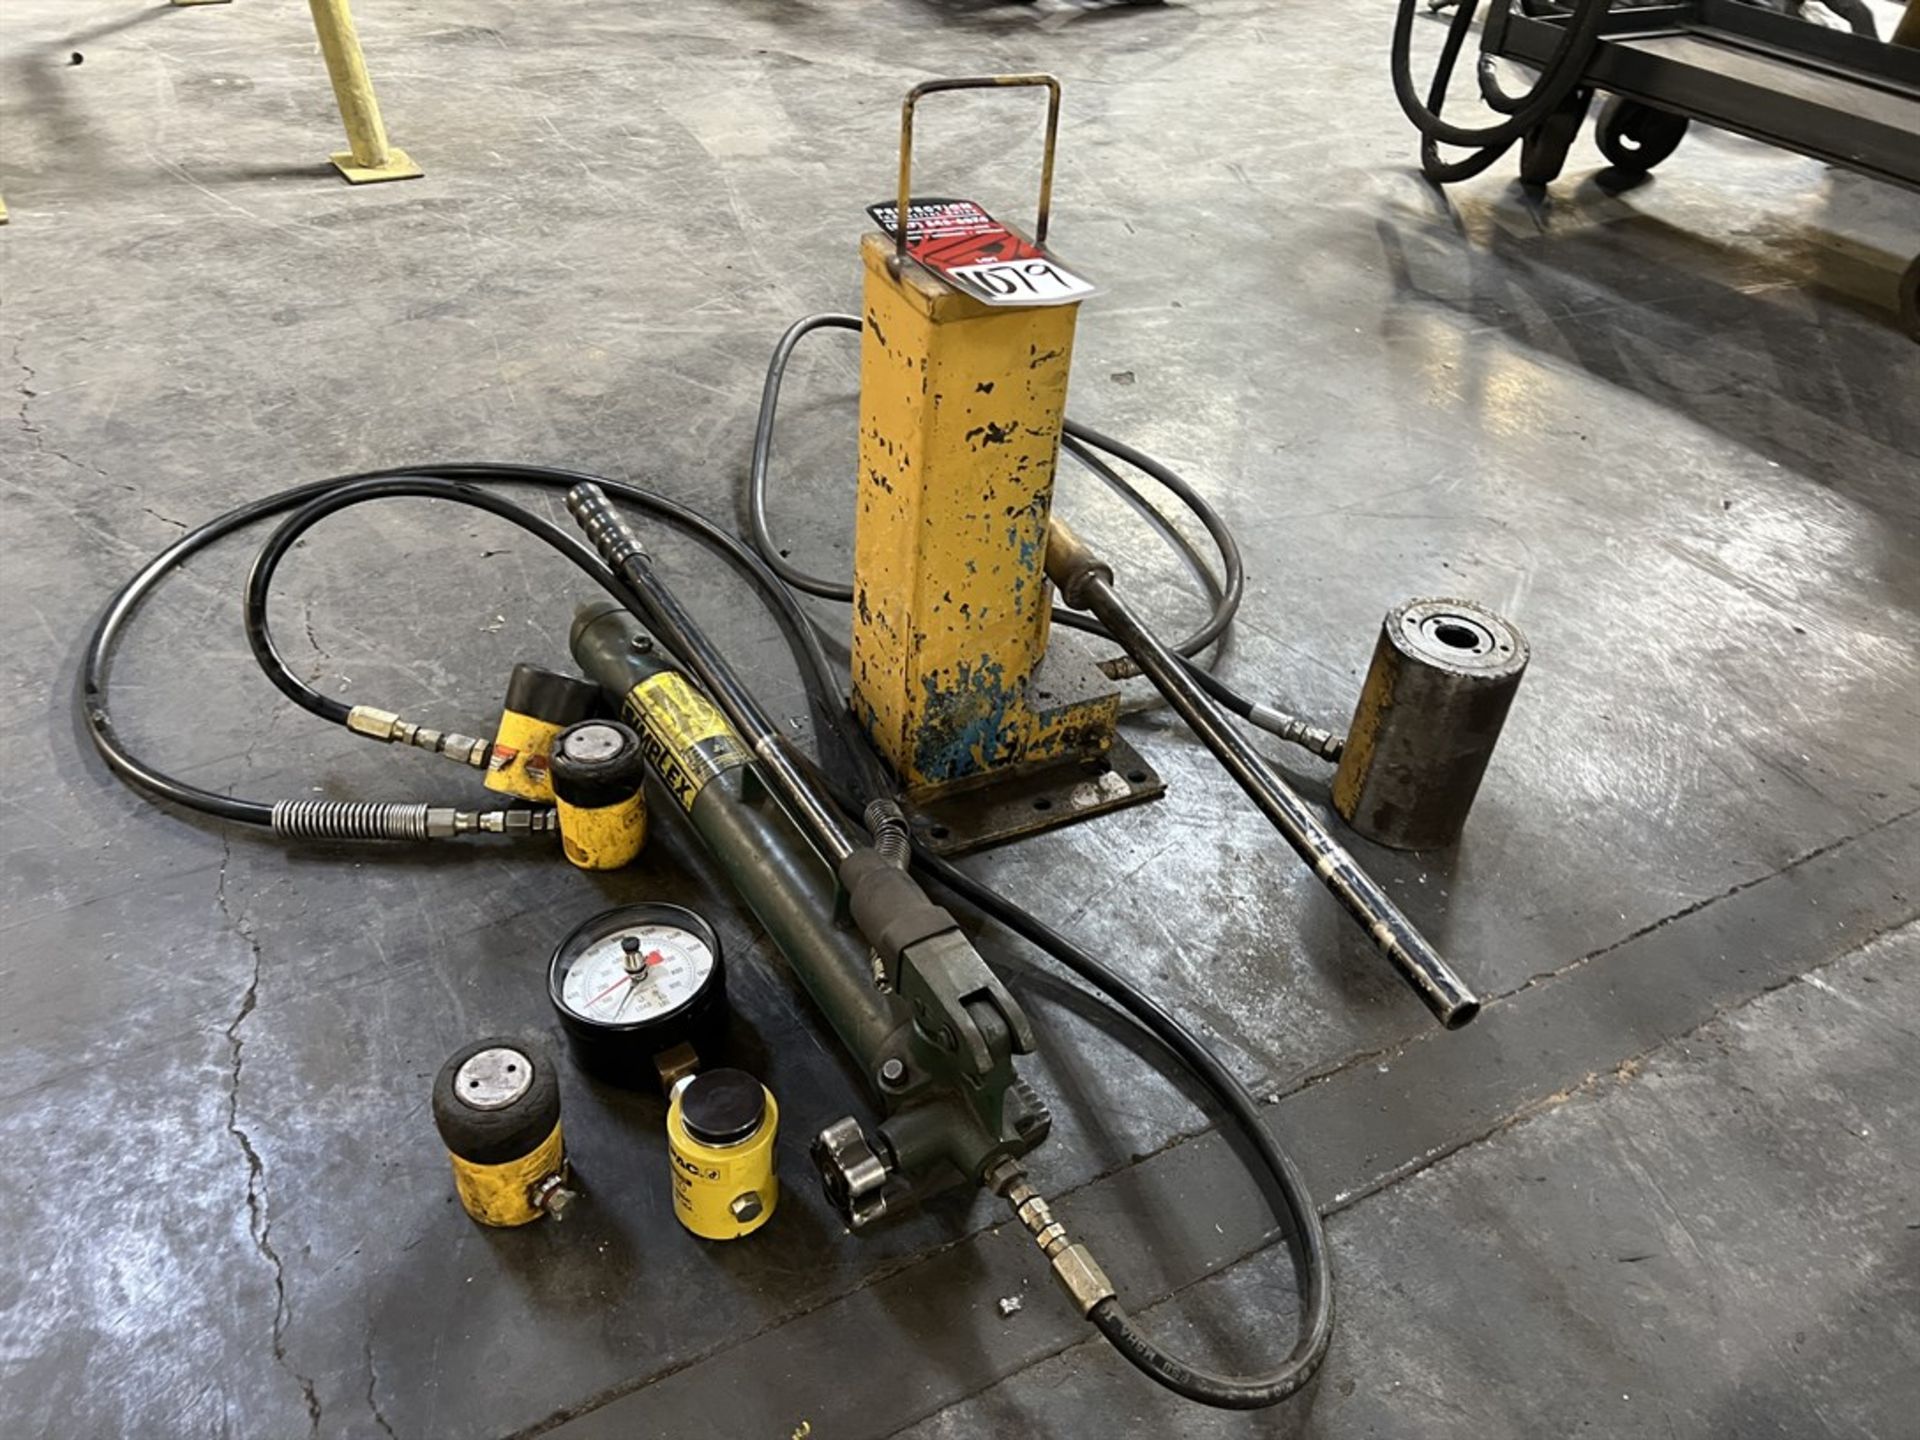 Lot Comprising Assorted Enerpac Hydraulic Pumps and Cylinders (Machine Shop) - Image 2 of 4